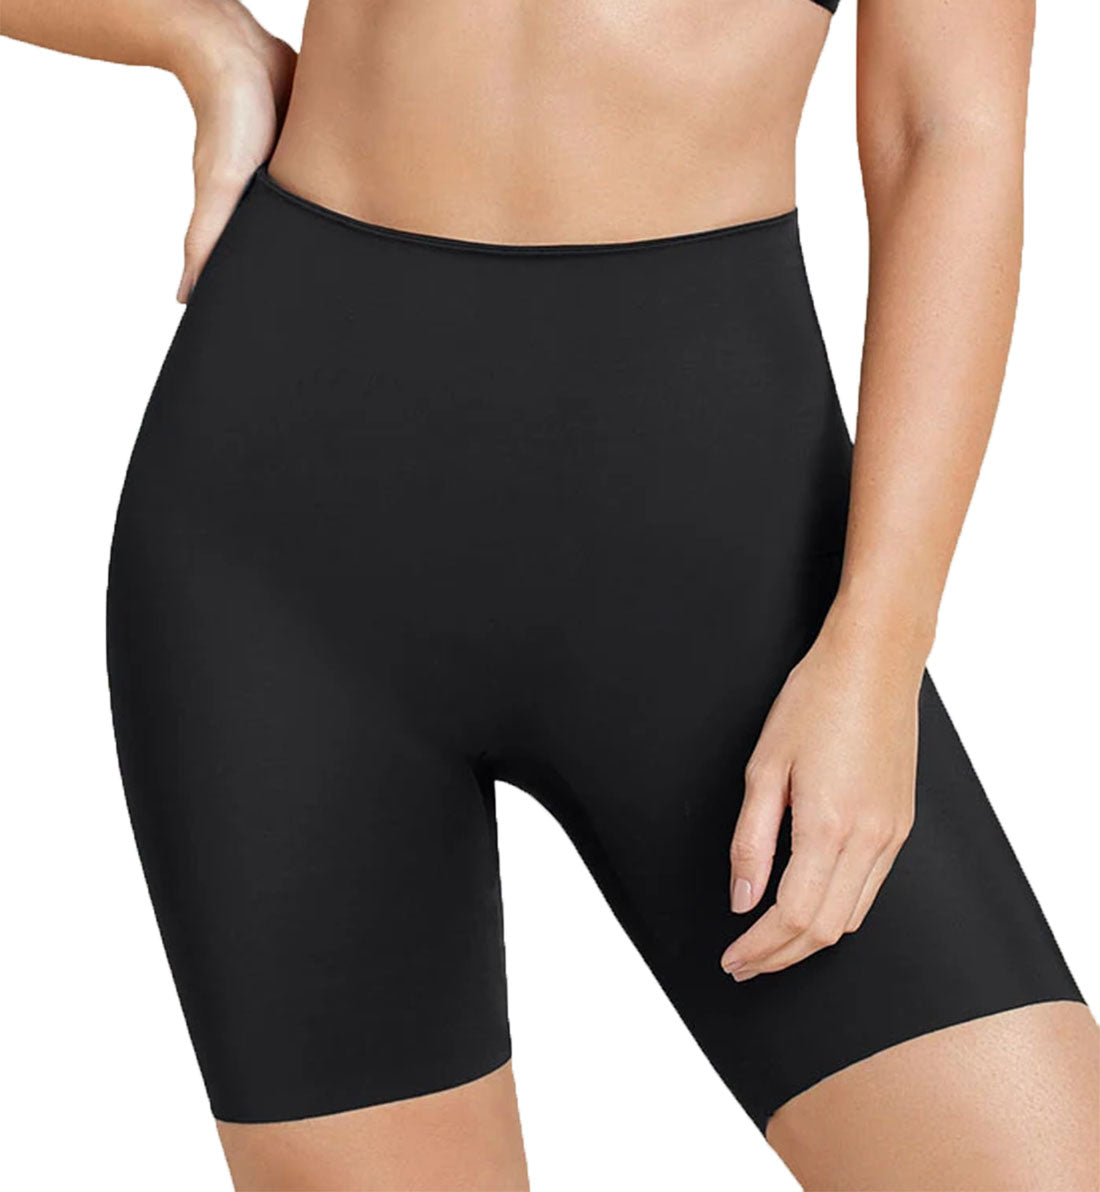 LEONISA 012889 UNDETECTABLE PADDED BOOTY LIFTER SHAPER SHORT